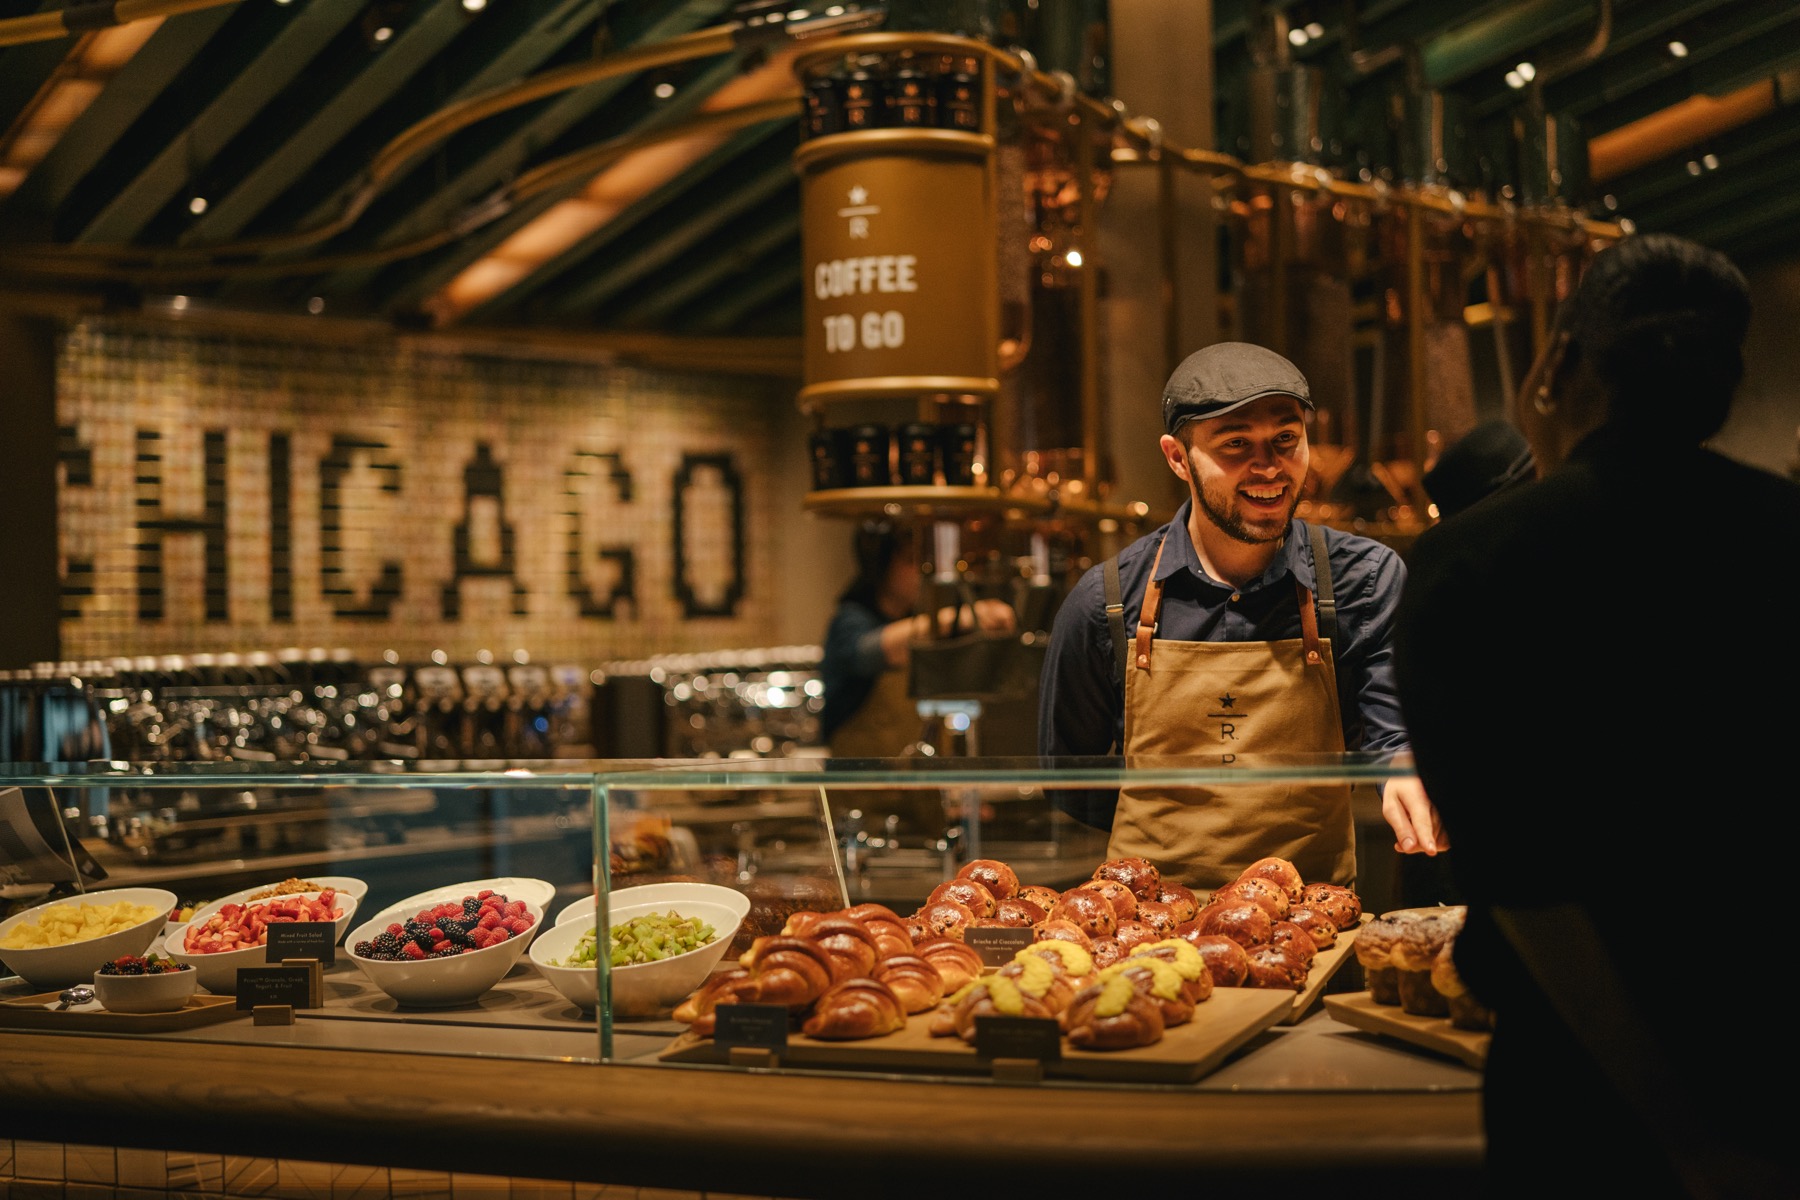 The world's largest Starbucks is open Chicago | Choose Chicago